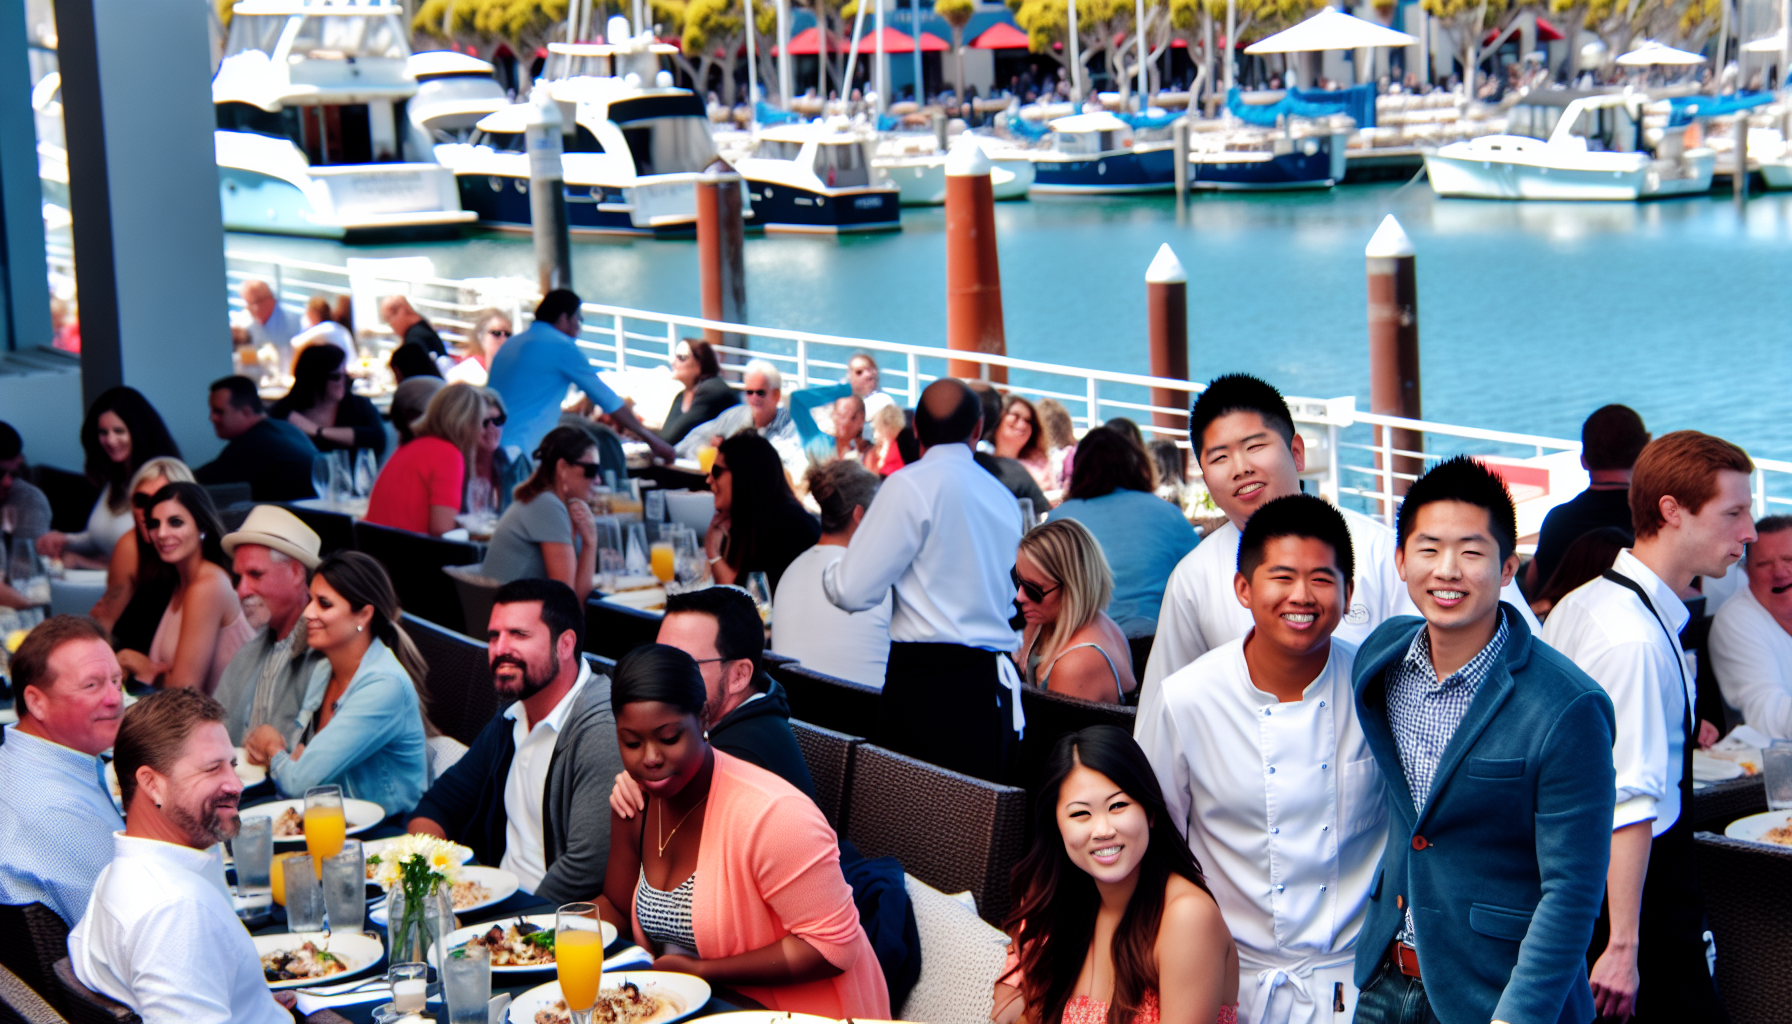 Vibrant atmosphere at Shooters Waterfront with dockside views